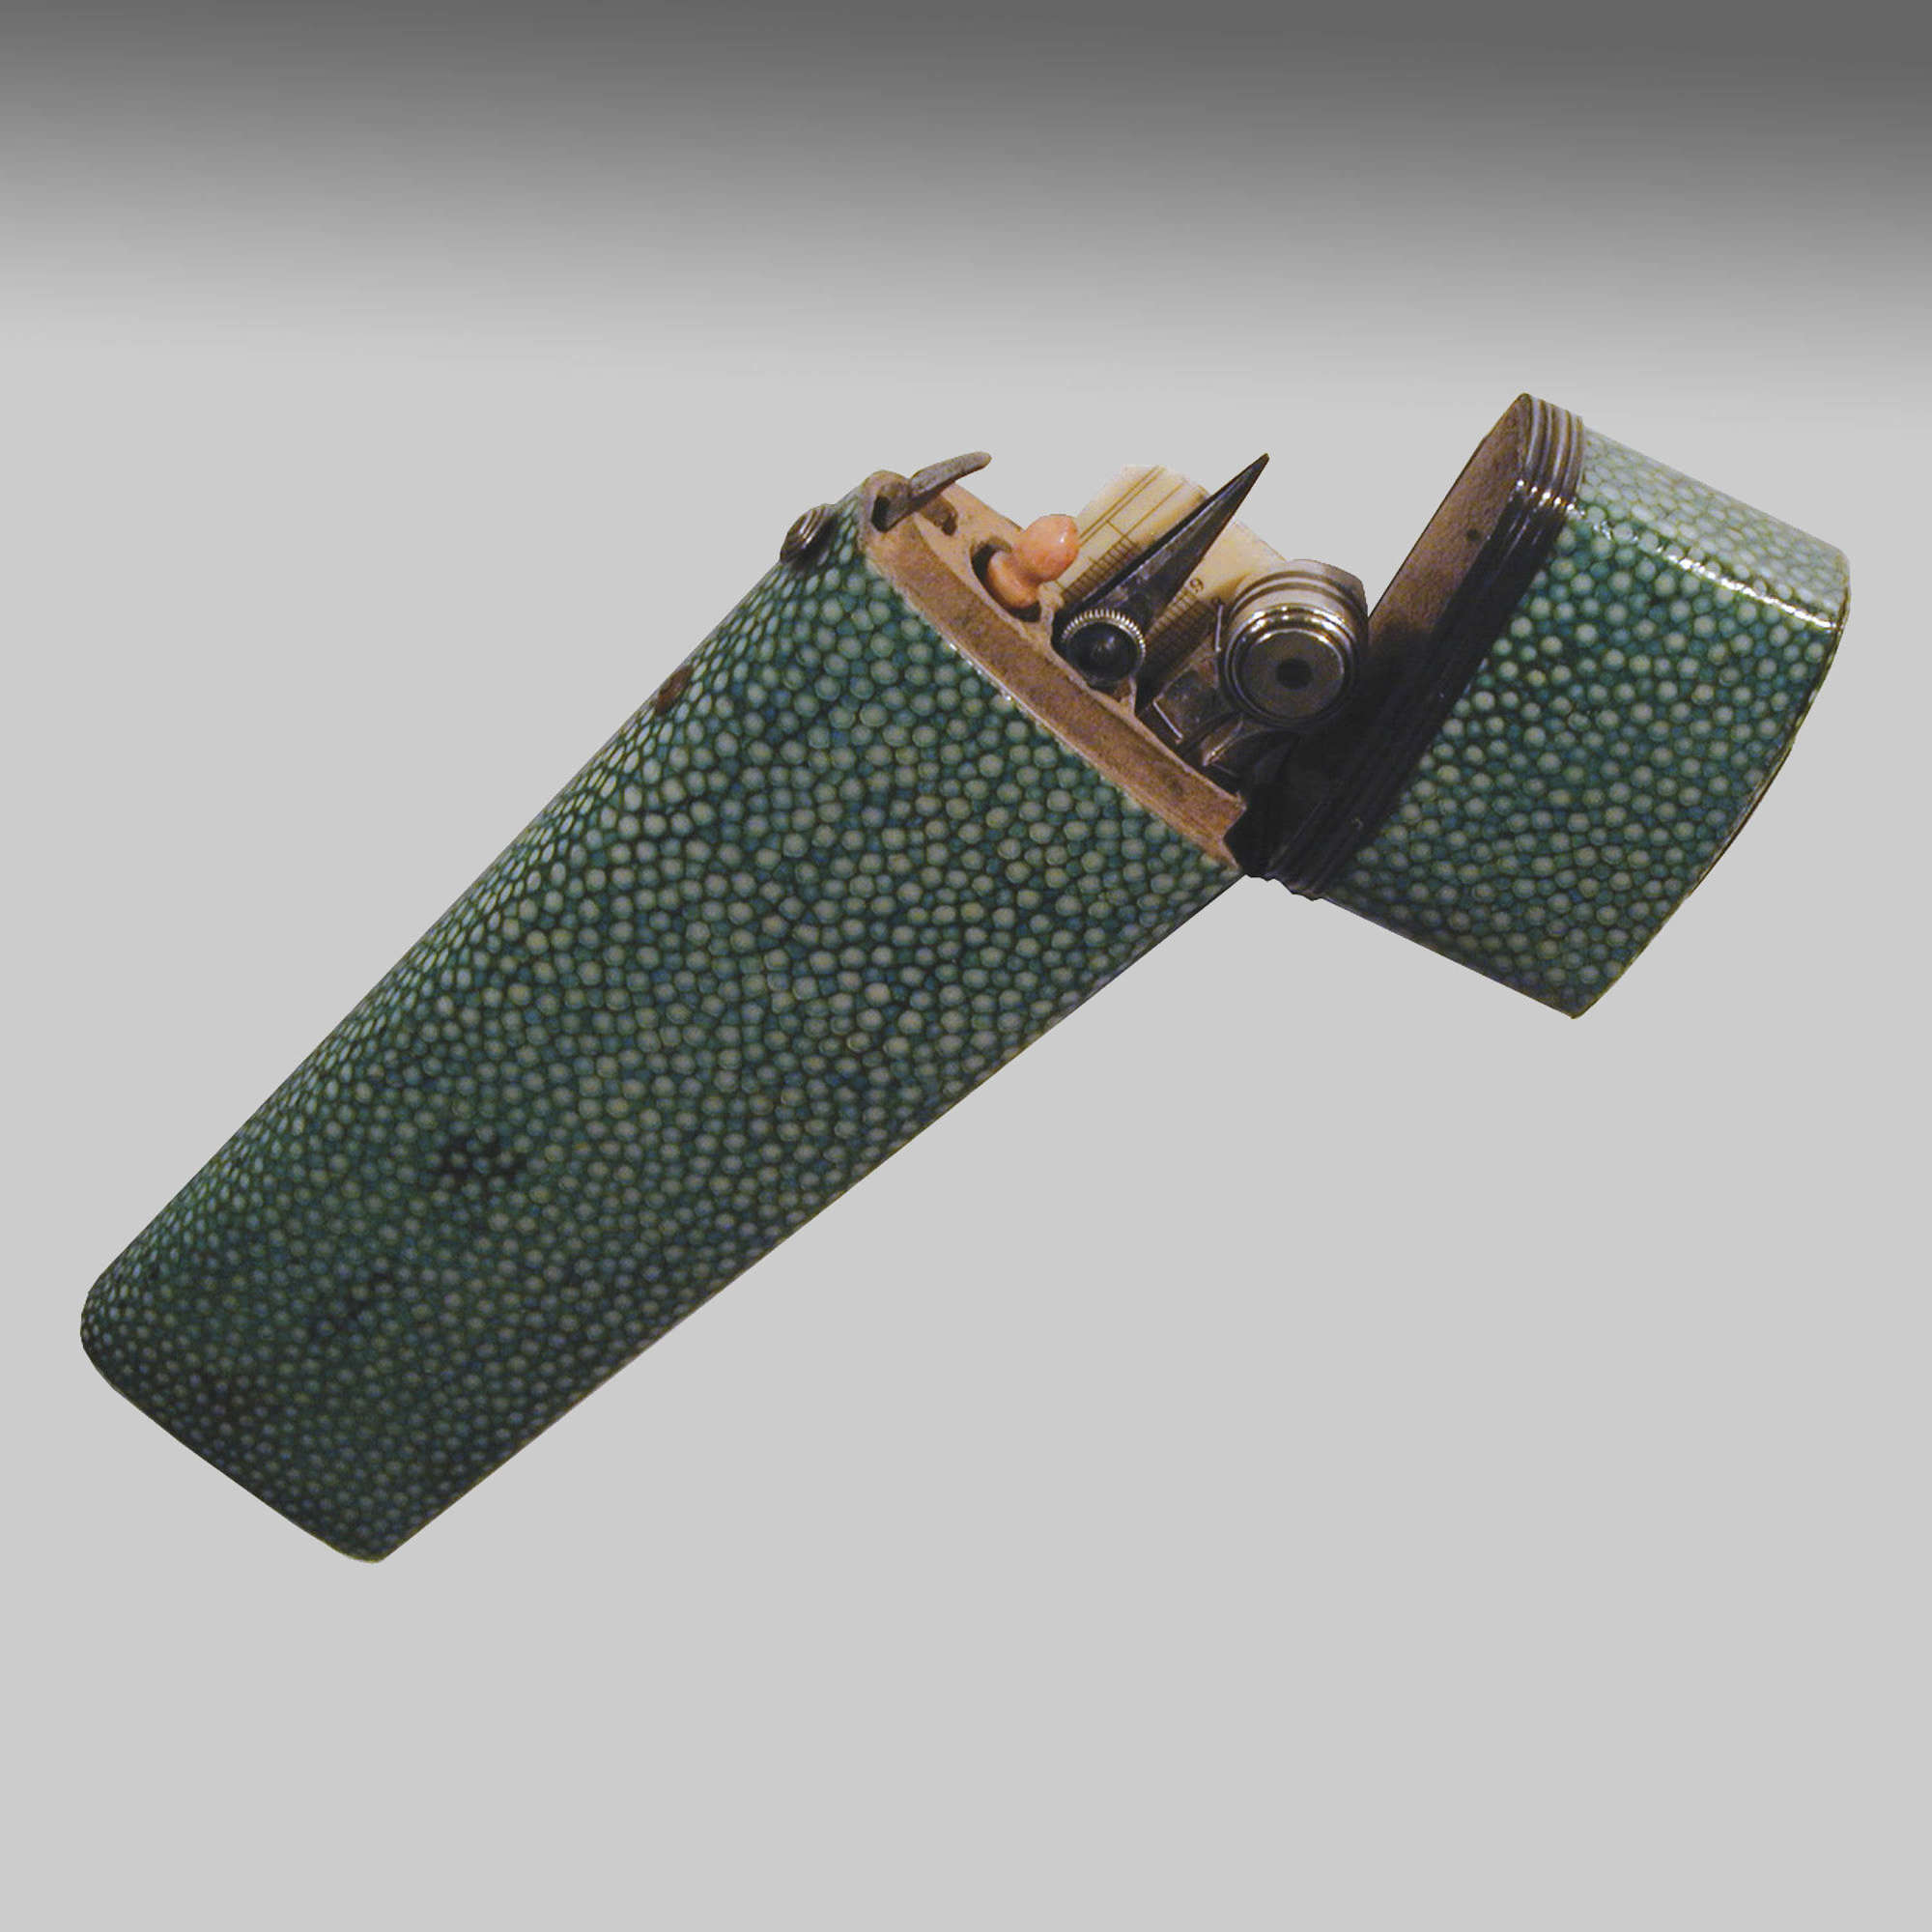 Shagreen cased etui of cartographer's drawing instruments